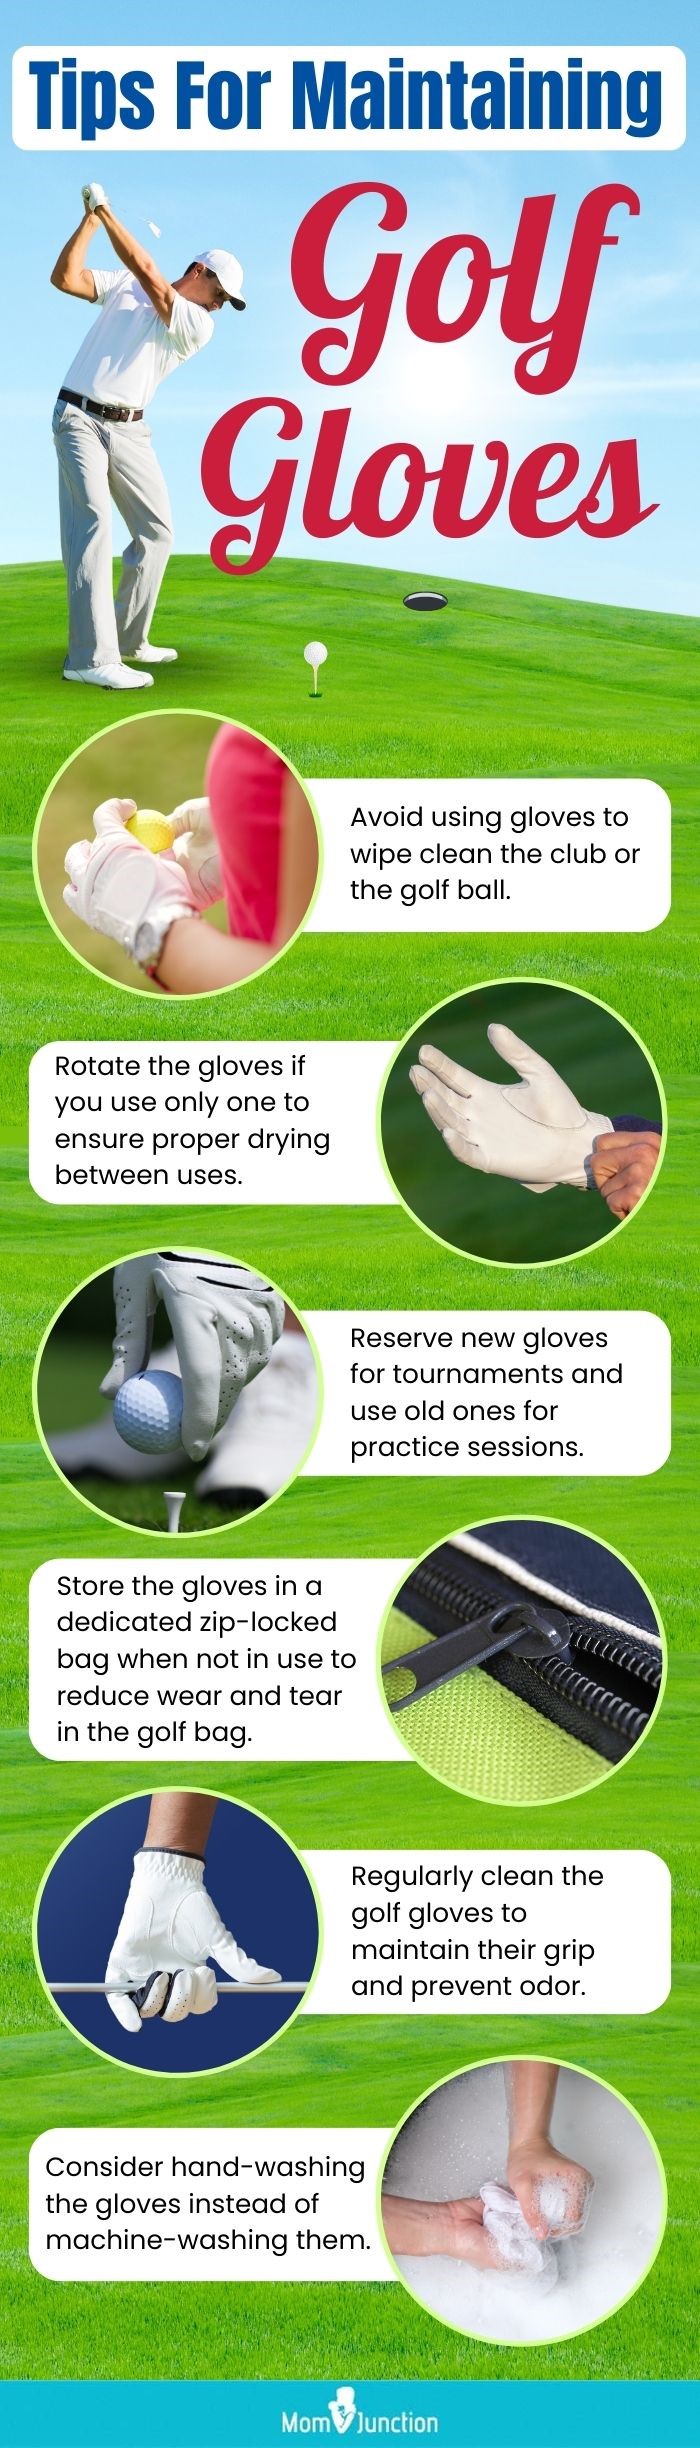 Tips For Maintaining Golf Gloves (infographic)